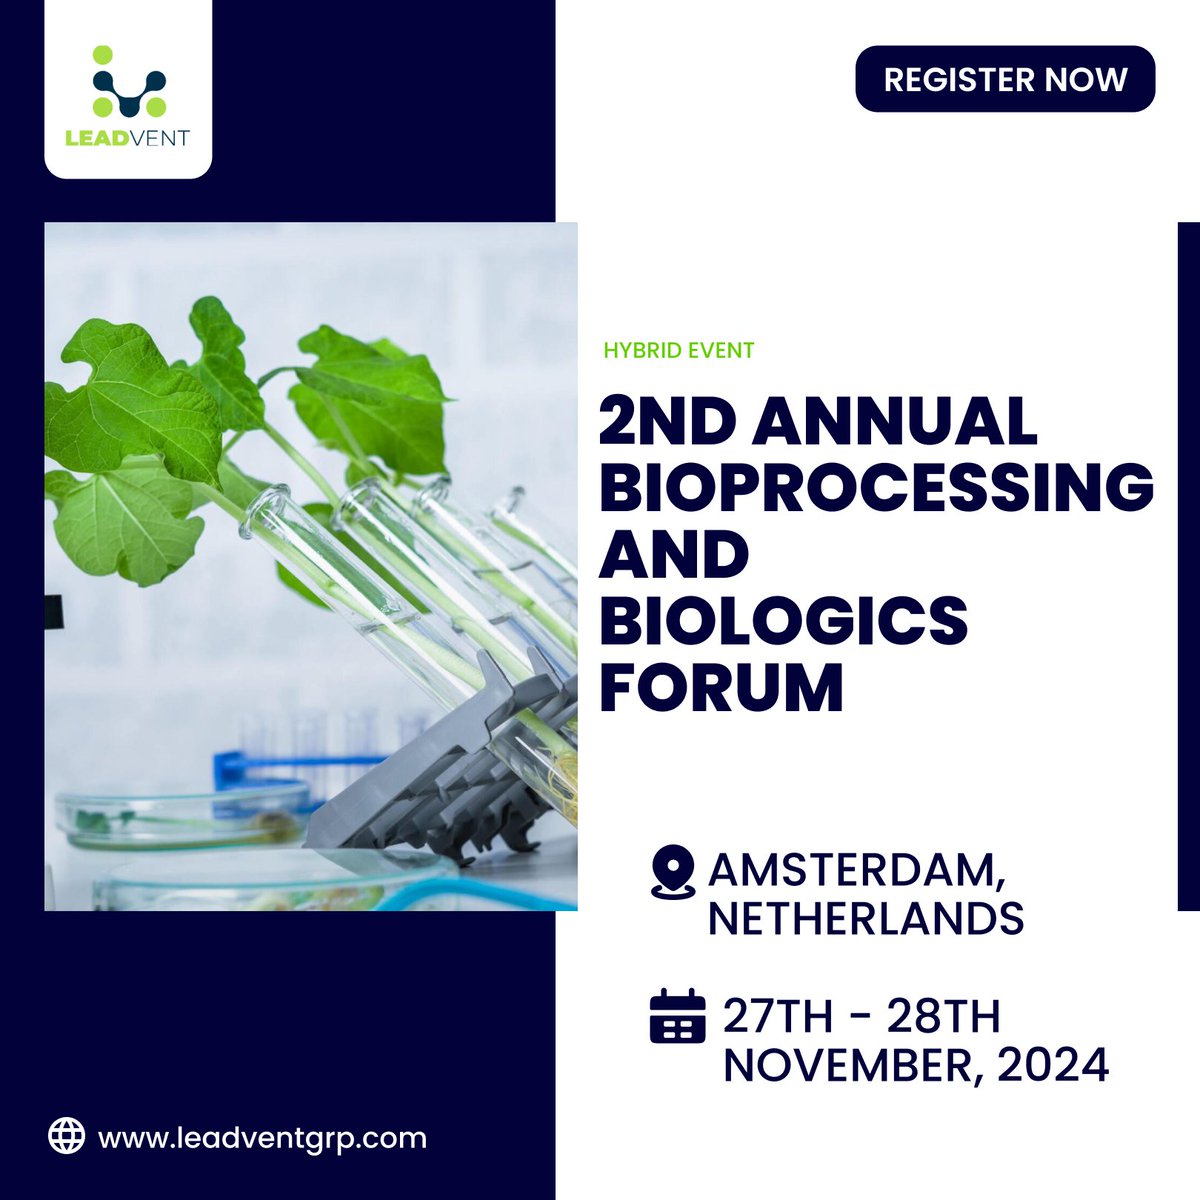 Step into the Future at the 2nd Annual Bioprocessing and Biologics Forum 2024!

Save the Date: 27th -28th November, 2024 in Amsterdam, Netherlands

t.ly/Z3aos

#BioprocessingForum